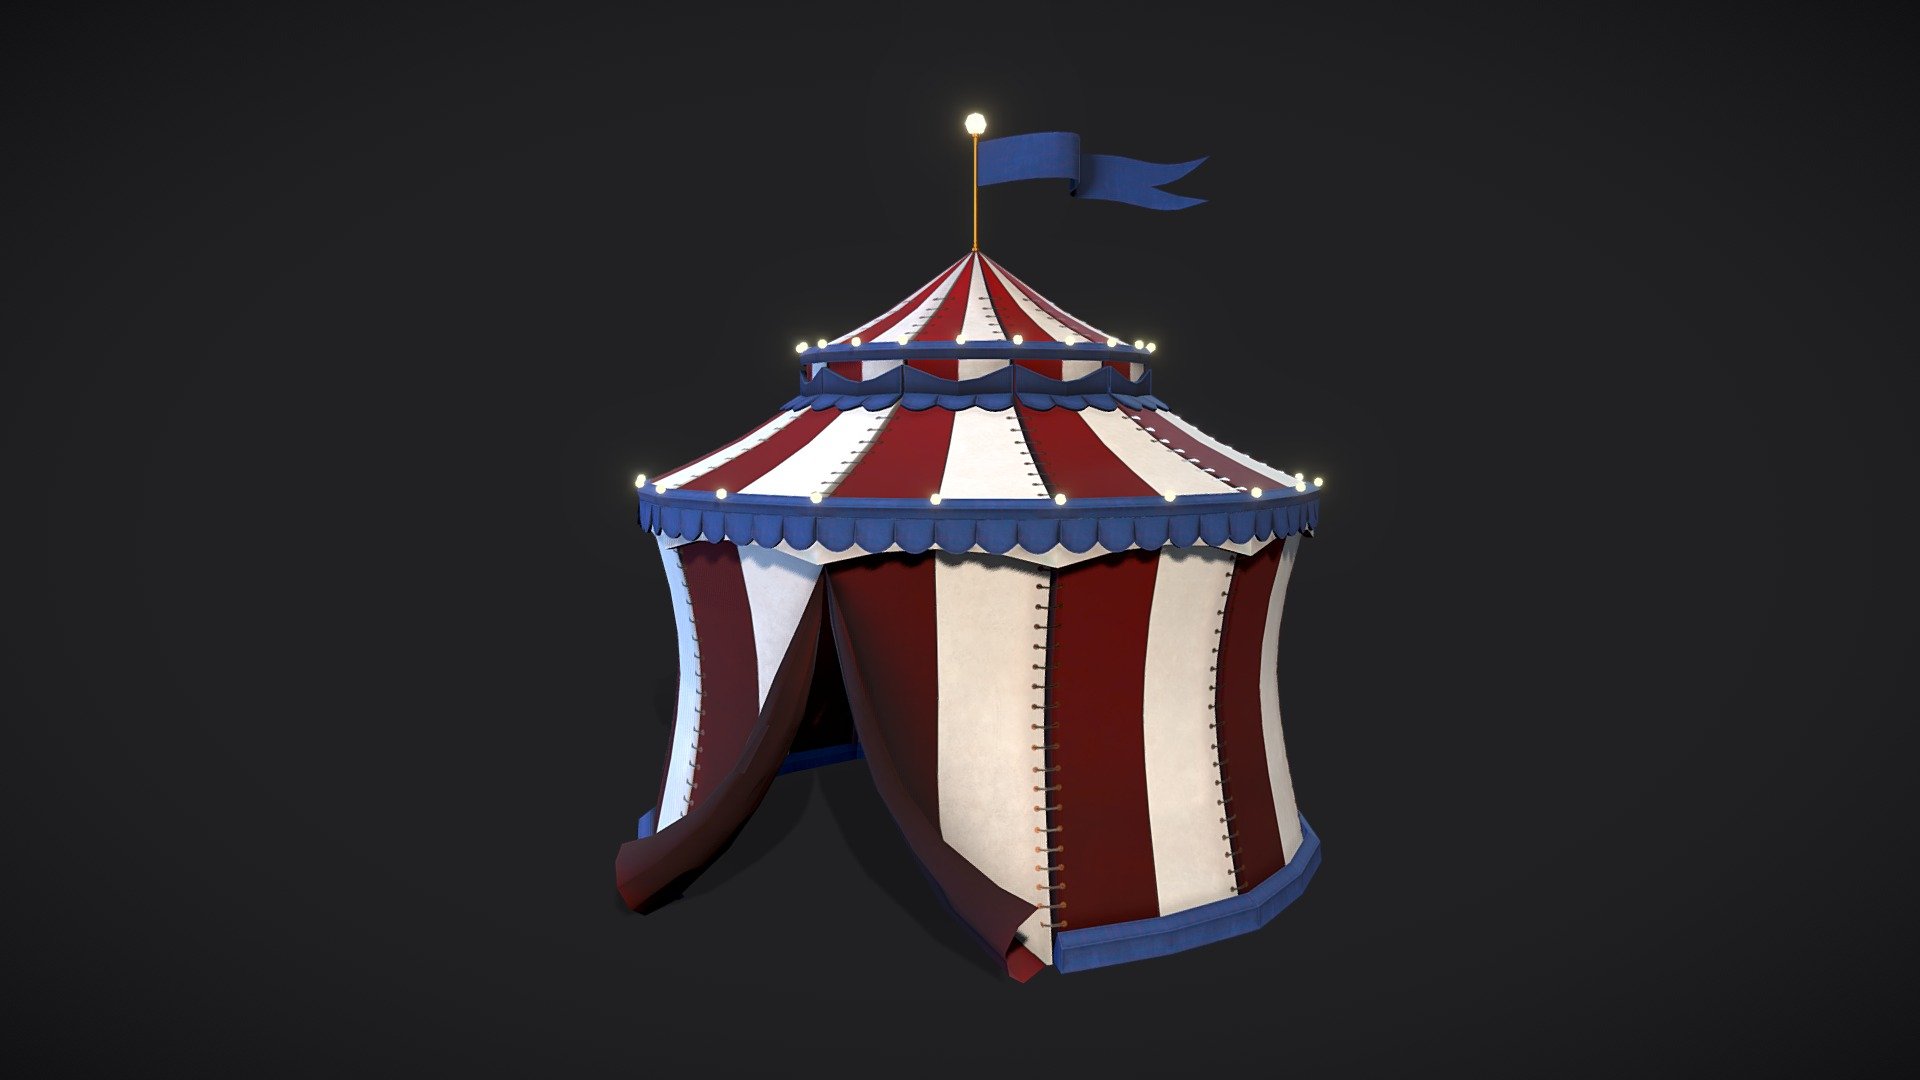 Circus tent game-ready model.

PBR Metal-Roughness.
Overlapping UV's.
Polys - 4700
Real-World Scale.

The archive contains the following files:


.MA file (original MAYA file, version 2022)
FBX file
OBJ 

Texture set (available in 20482048 and 40964096)


Tent_BaseColor
Tent_Normal
Tent_Metallic
Tent_Roughness
Tent_Emissive
Tent_AO
Tent_Opacity

If you have any additional questions or any problems related to the model, kindly contact me: katy.b2802@gmail.com - Circus Tent - Buy Royalty Free 3D model by Enkarra 3d model